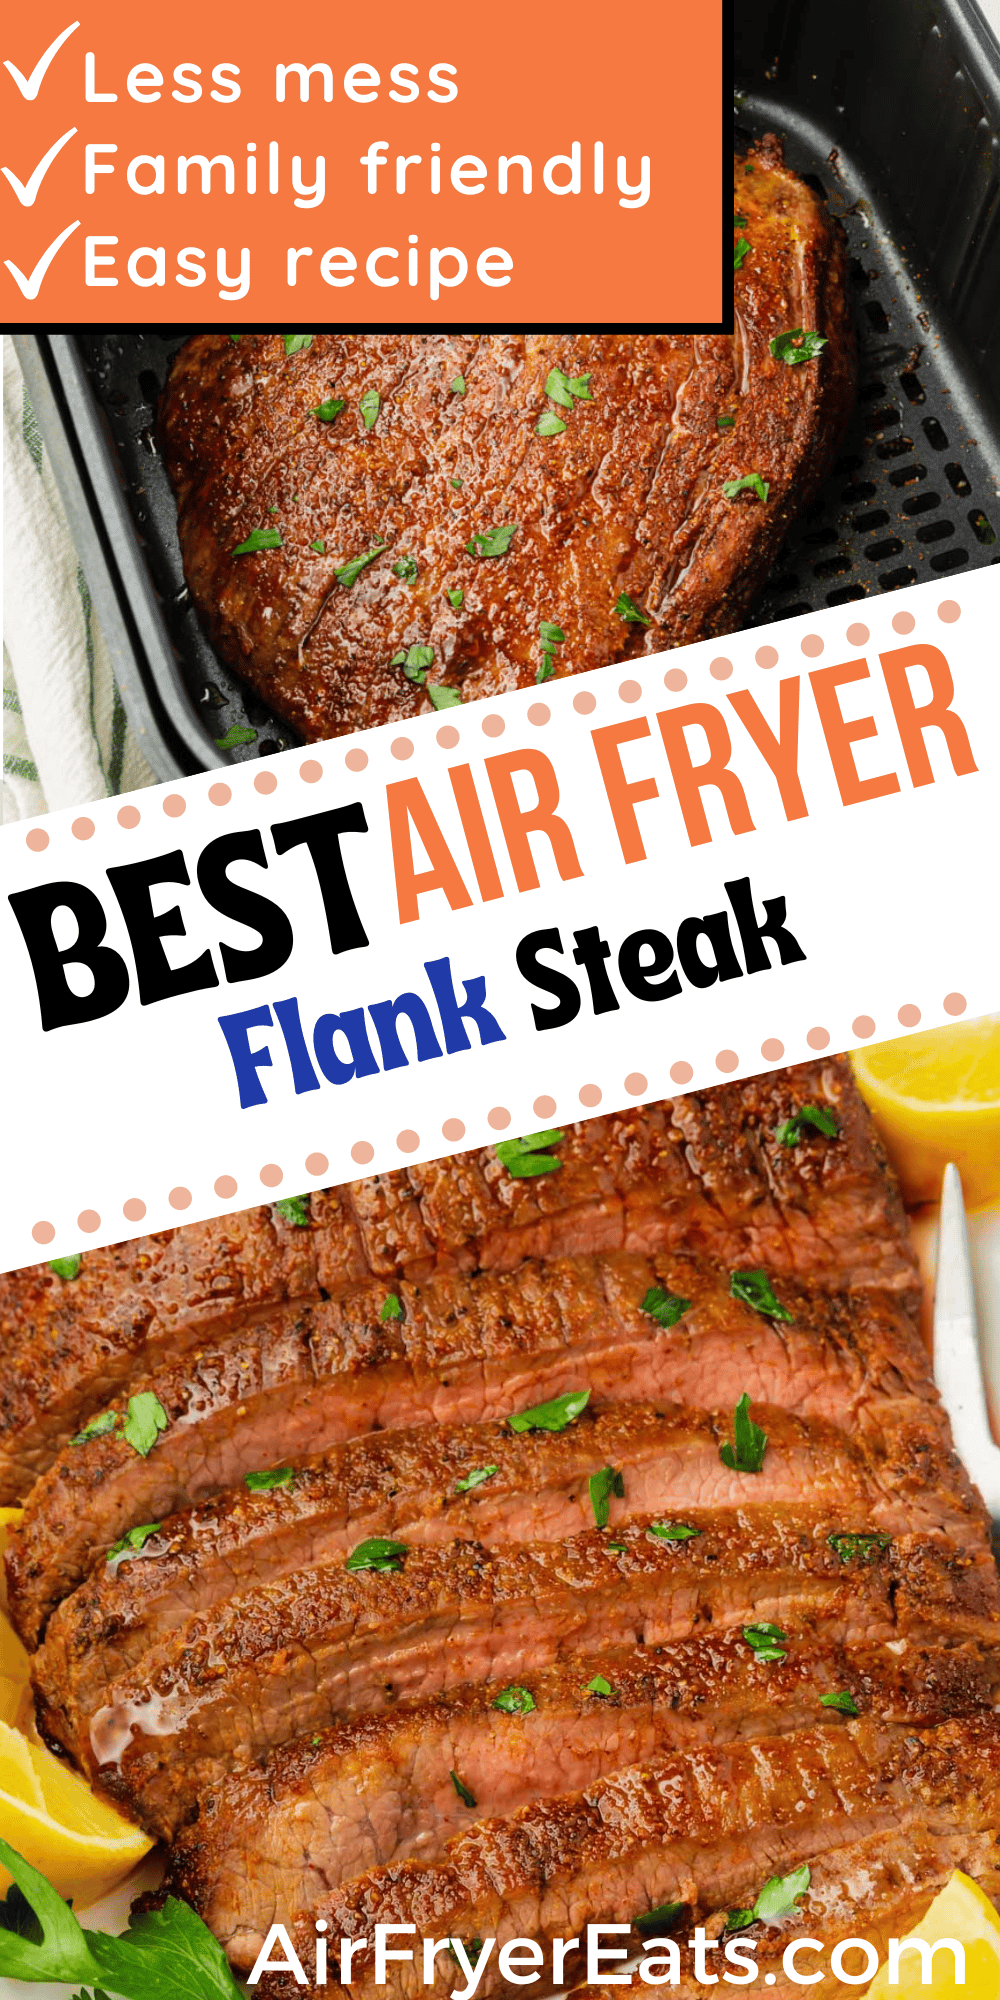 This Air Fryer Flank Steak Recipe is so easy! A flavorful dry rub turns an inexpensive cut of beef into a juicy steak in less than 20 minutes. via @vegetarianmamma